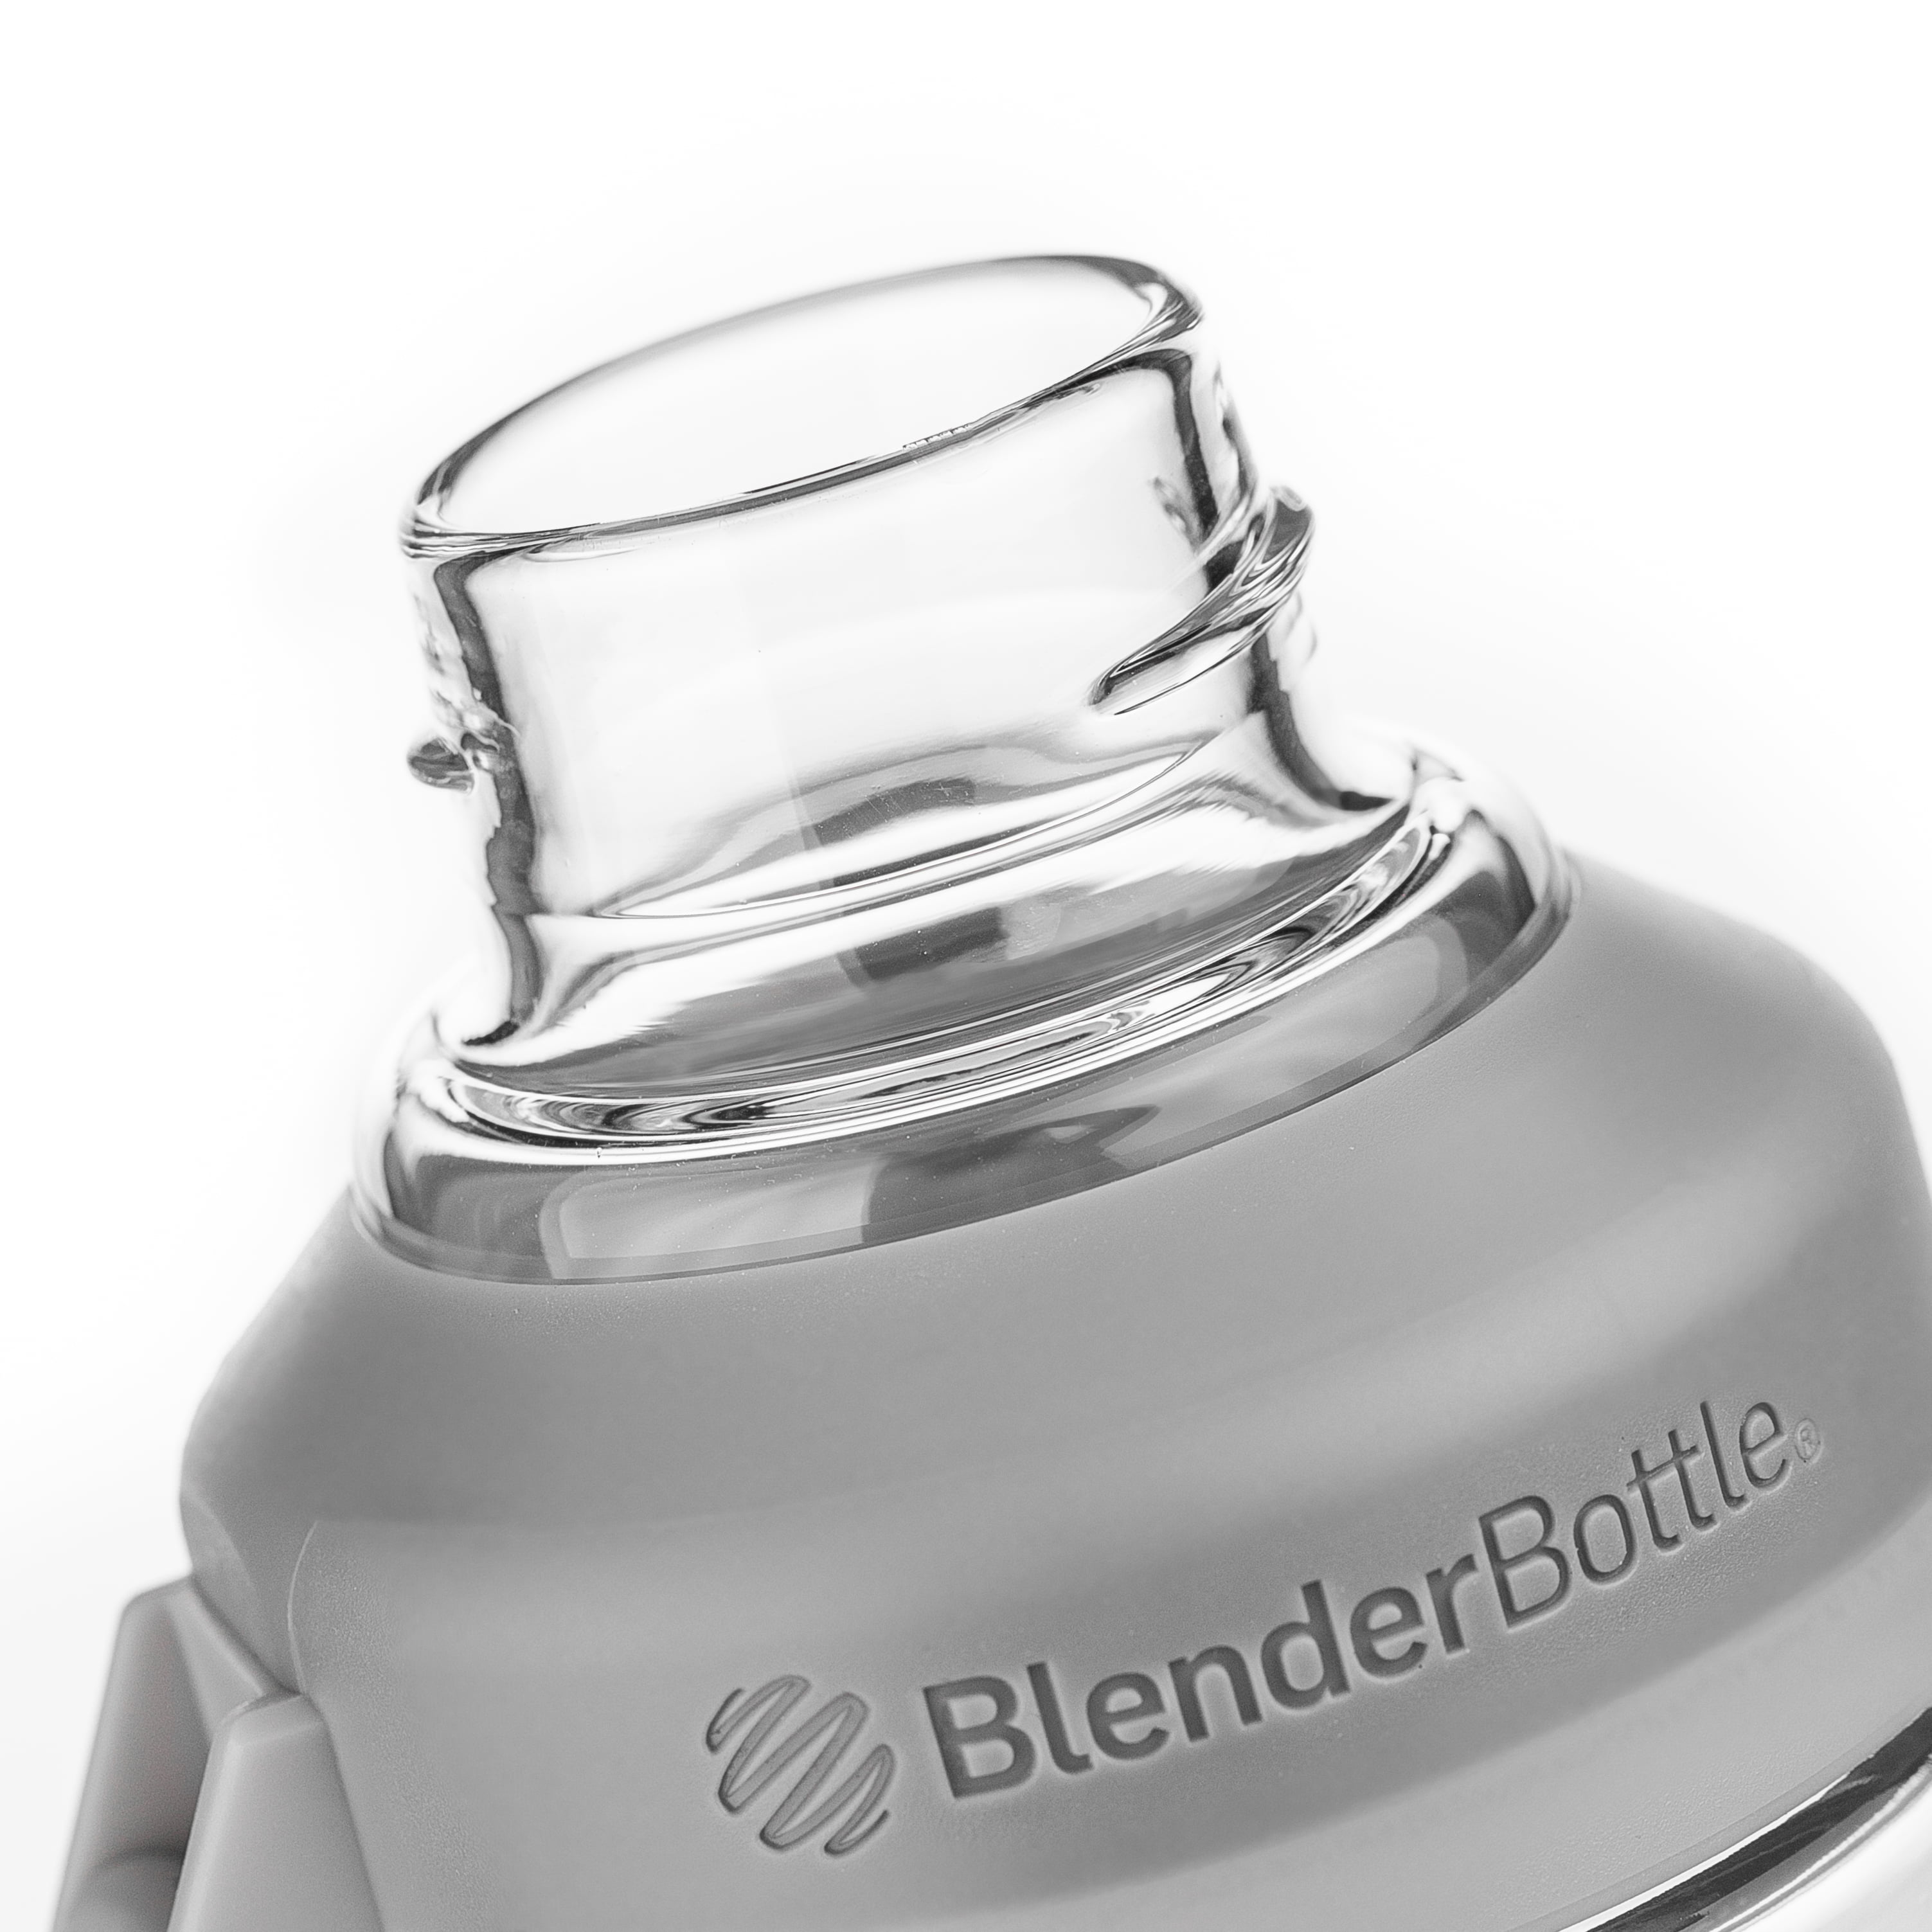 BLENDER BOTTLE PRO45 WITH METAL MIXING BALL 34 OZ. CHARCOAL GRAY WITH HANDLE